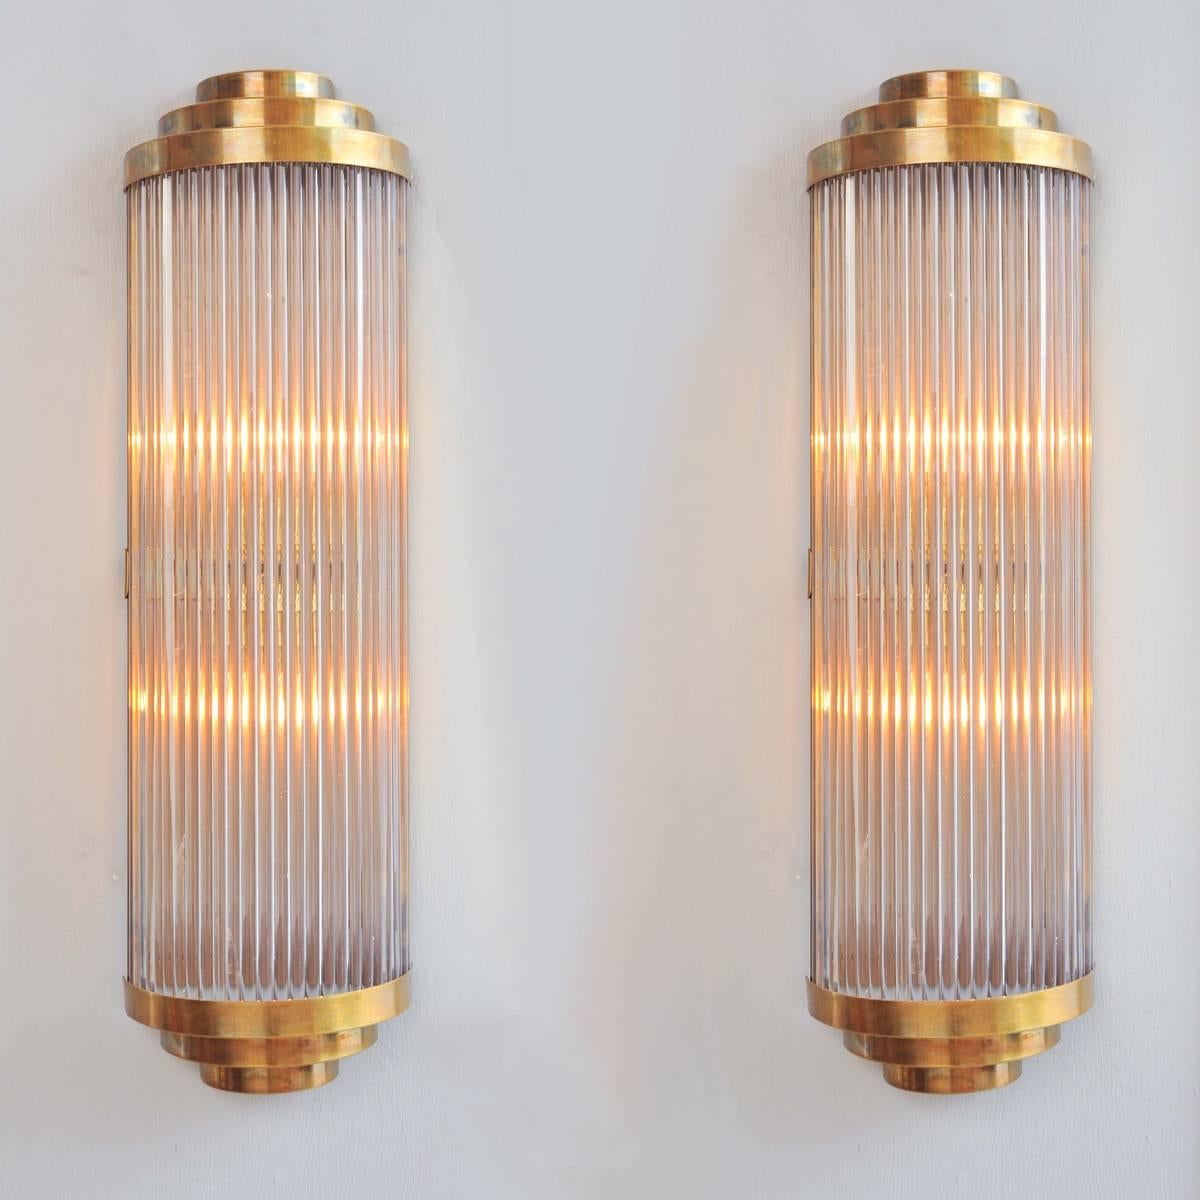 This ‘Ravello’ wall light takes its inspiration from a timelessly classic Art Deco design.
Multiple Italian glass rods form a semi-circle which is capped, top and bottom by 3 tiers of curved brass. The brass back plate holds two light bulbs and